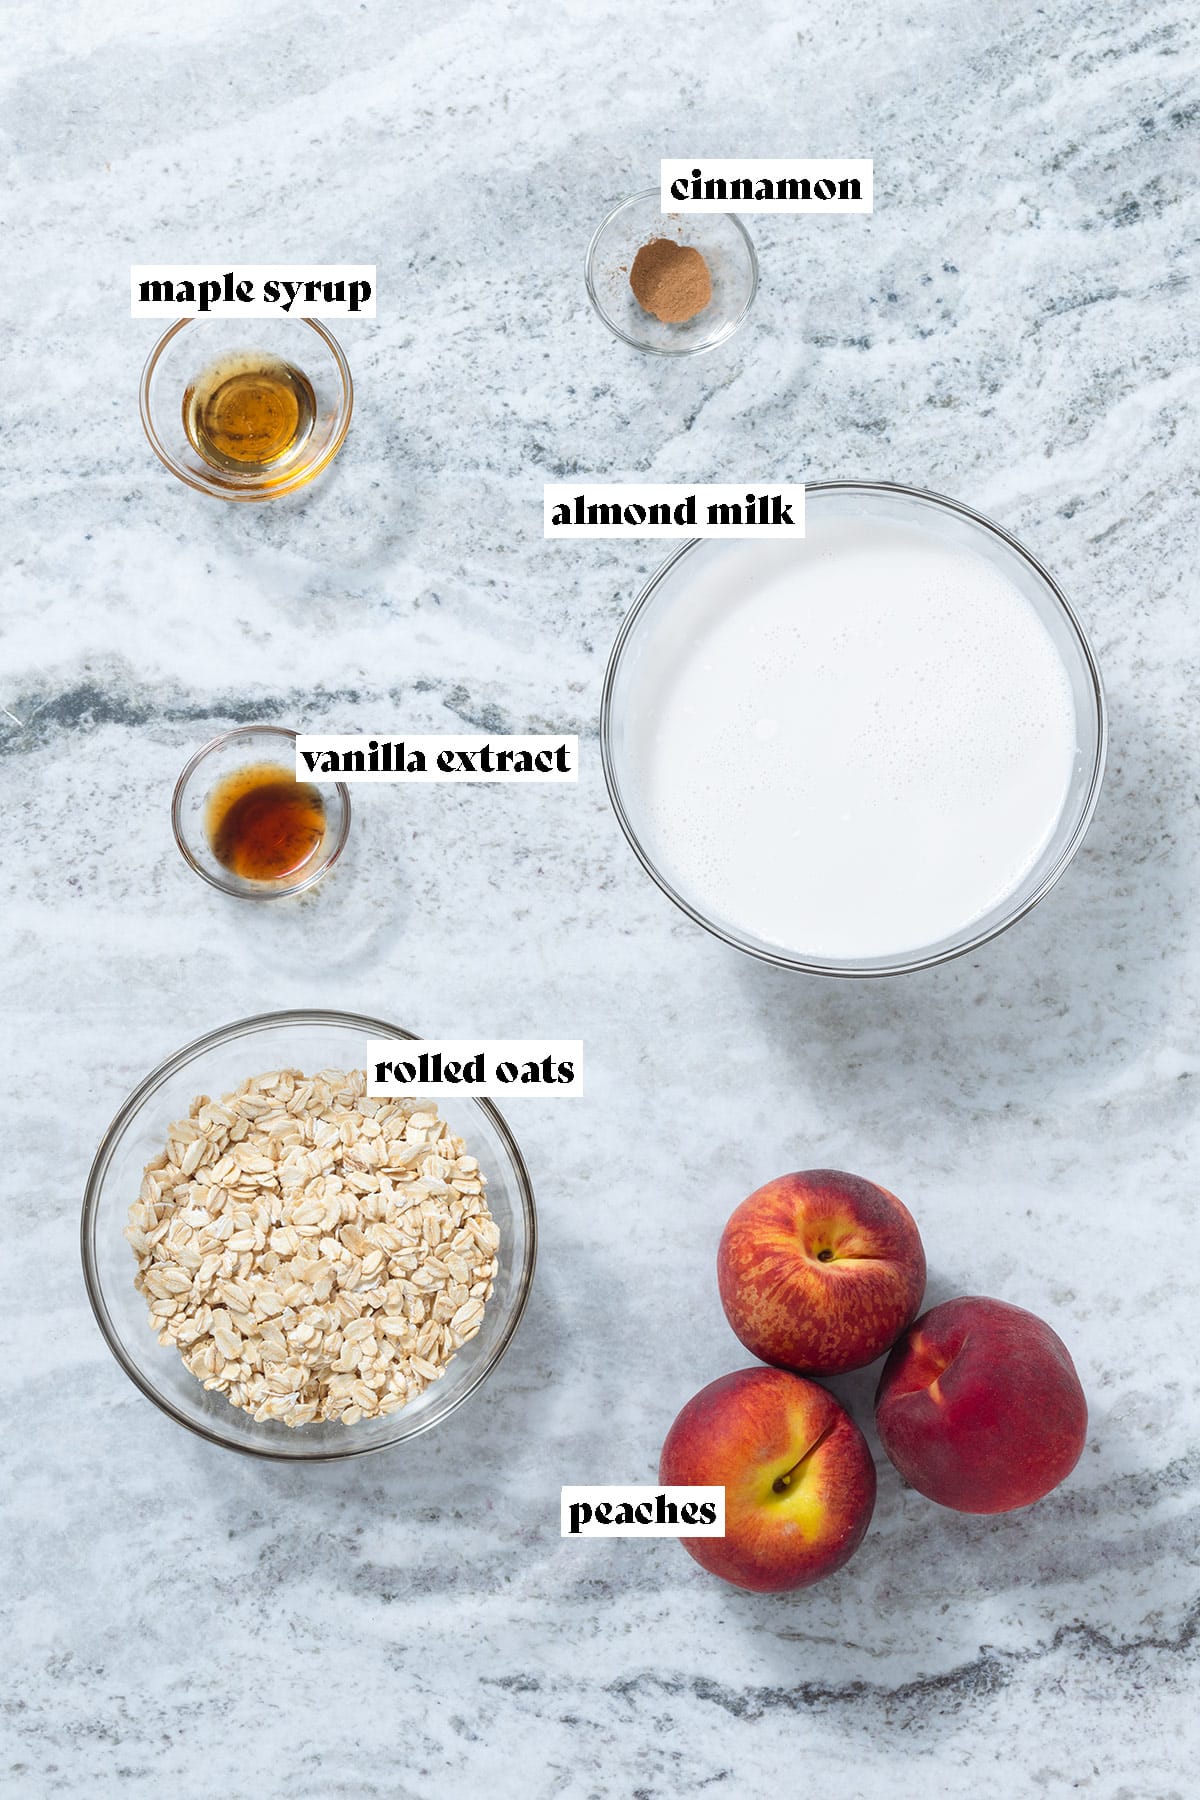 Oats, almond milk, peaches, maple syrup and other ingredients laid out on a grey stone background.